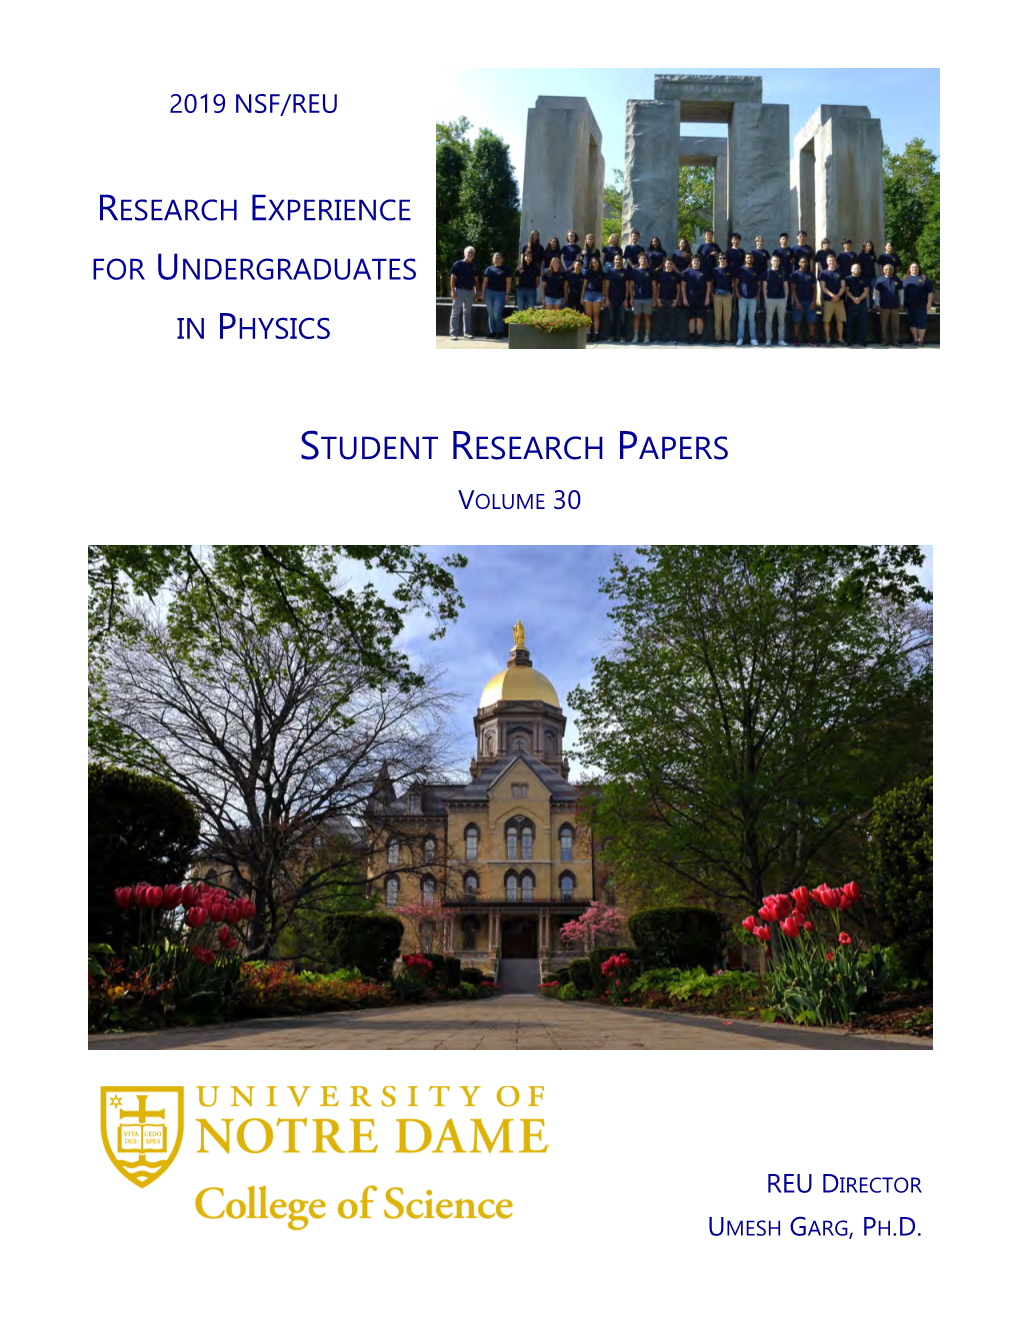 Student Research Papers Volume 30